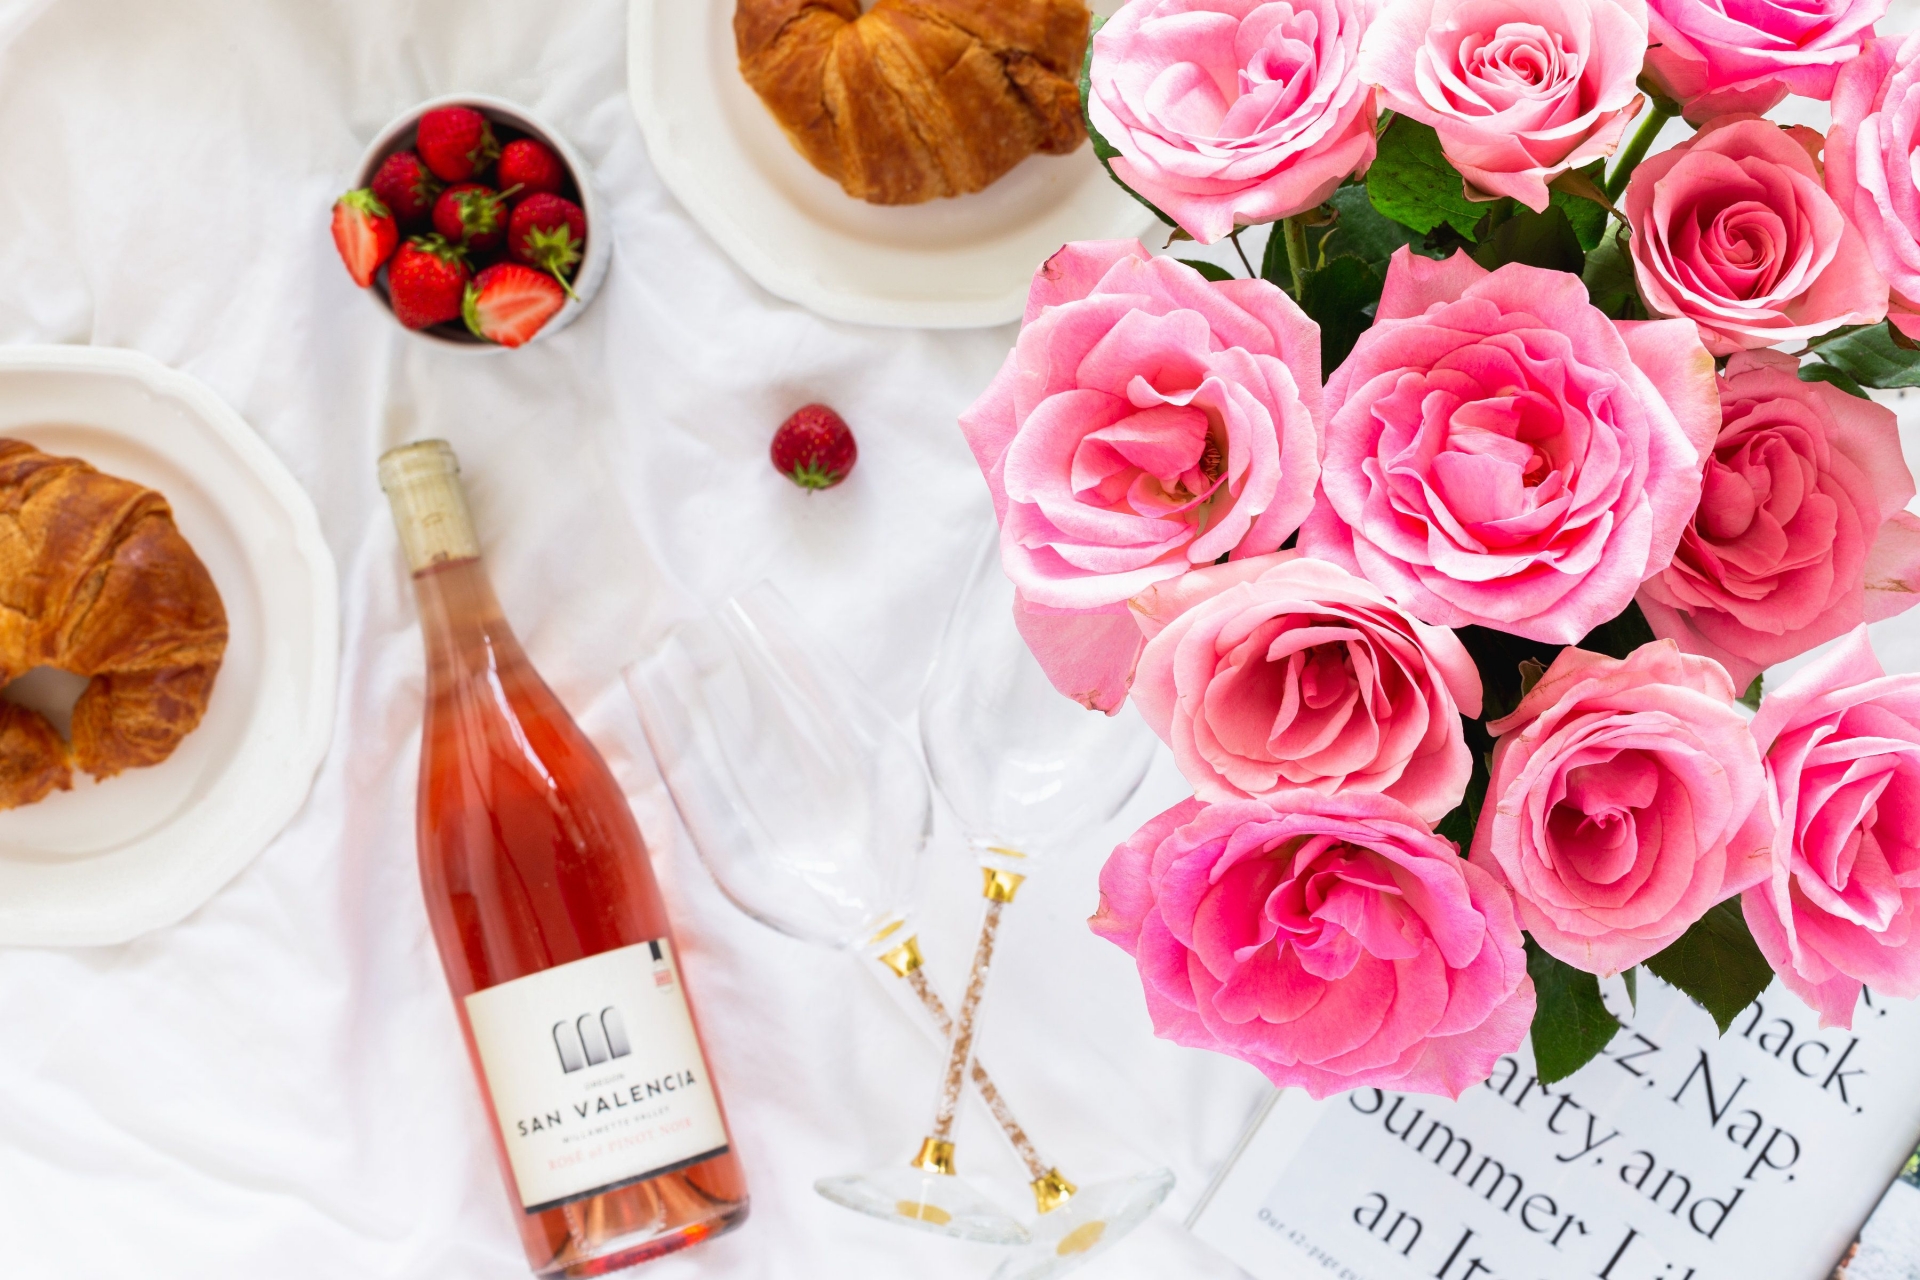 Top 10 Rose Wine to Drink in 2021/2022